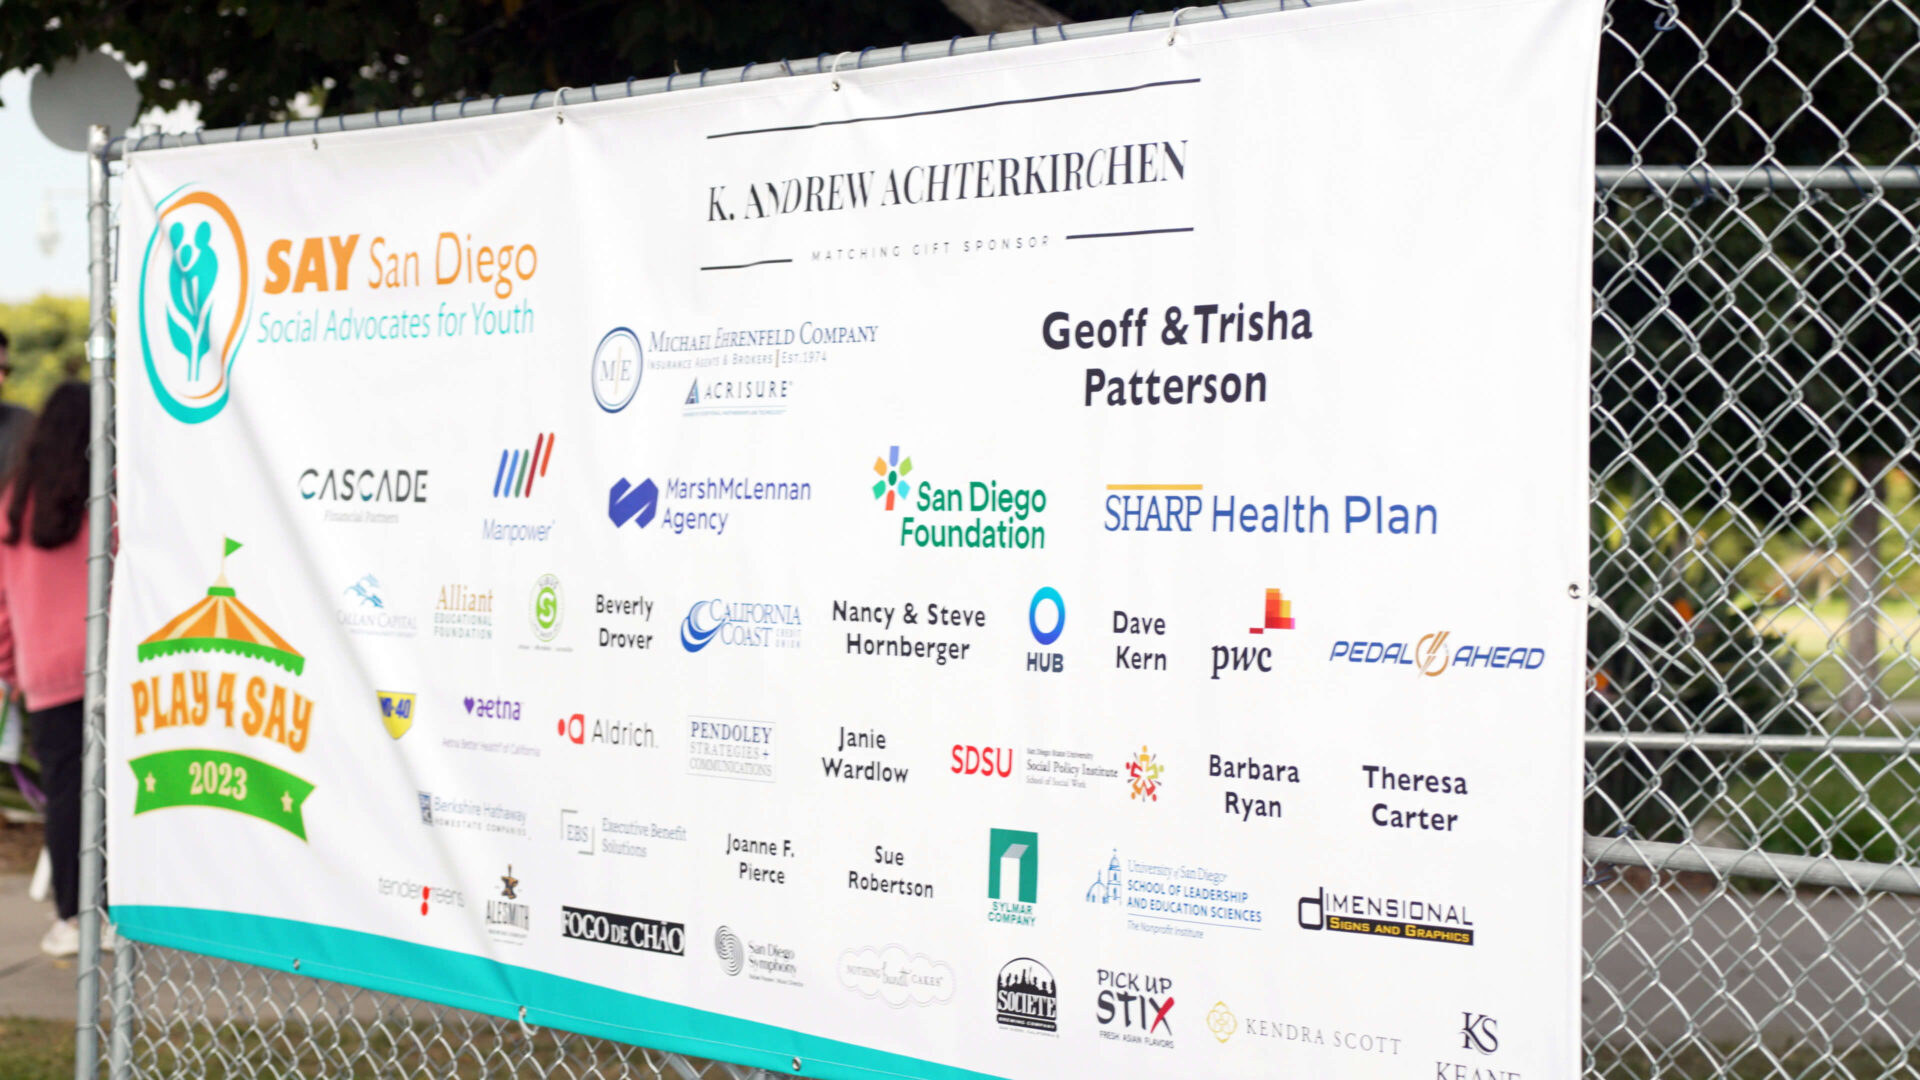 Banner titled "SAY San Diego Social Advocates for Youth" displayed on a chain-link fence, showcasing various sponsors through a corporate partnership in San Diego, including companies and individuals.